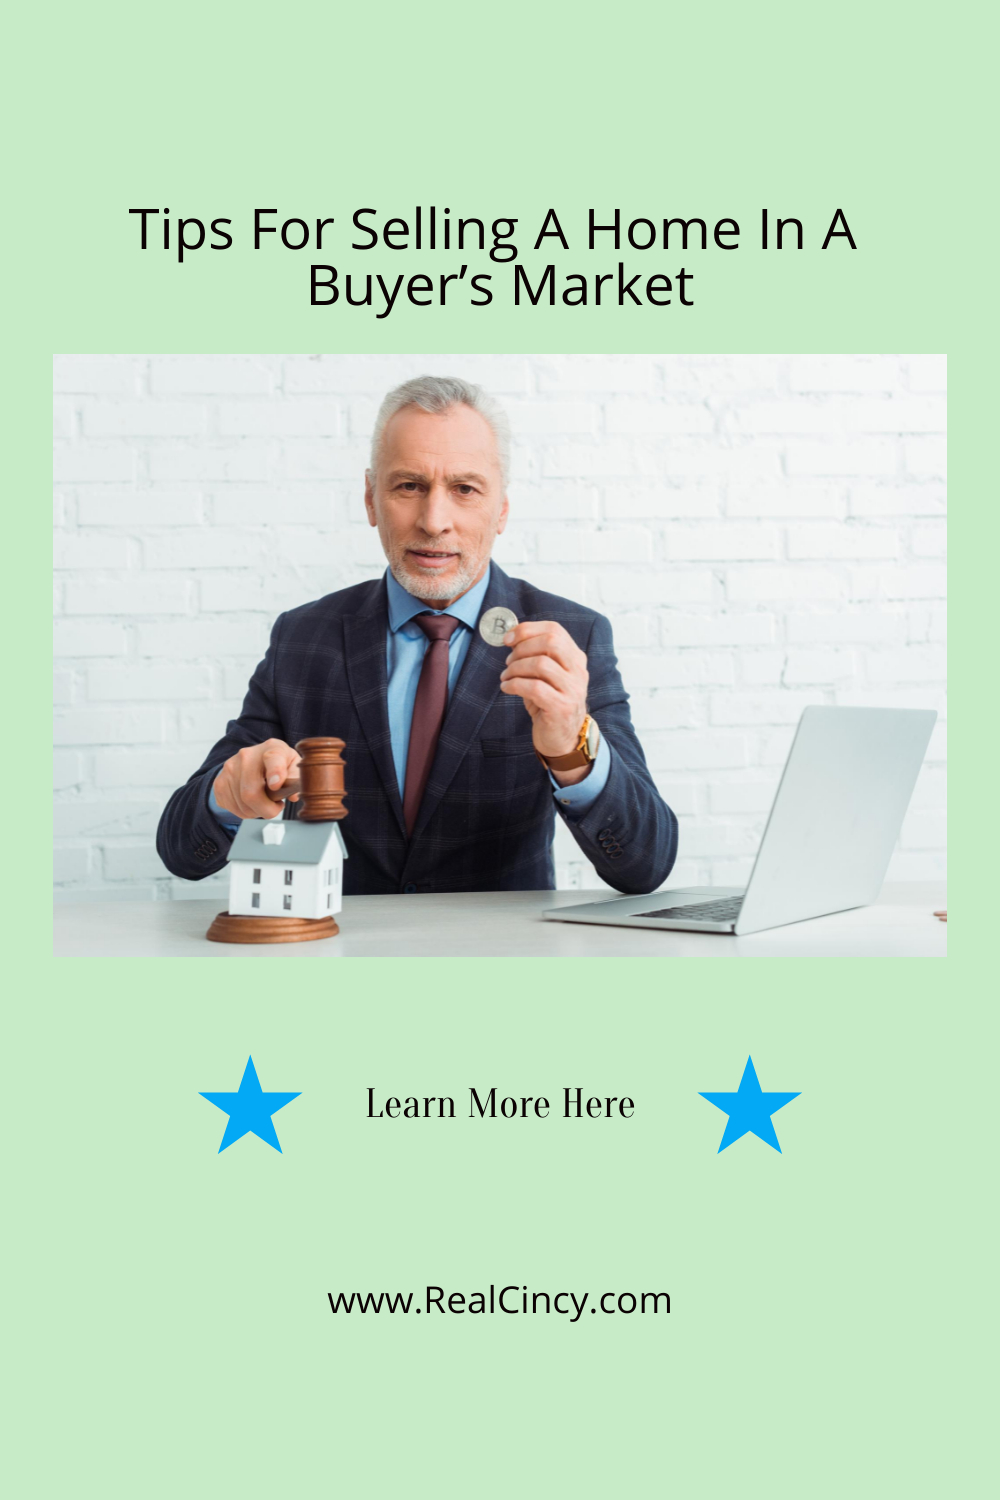 Tips For Selling A Home In A Buyer’s Market